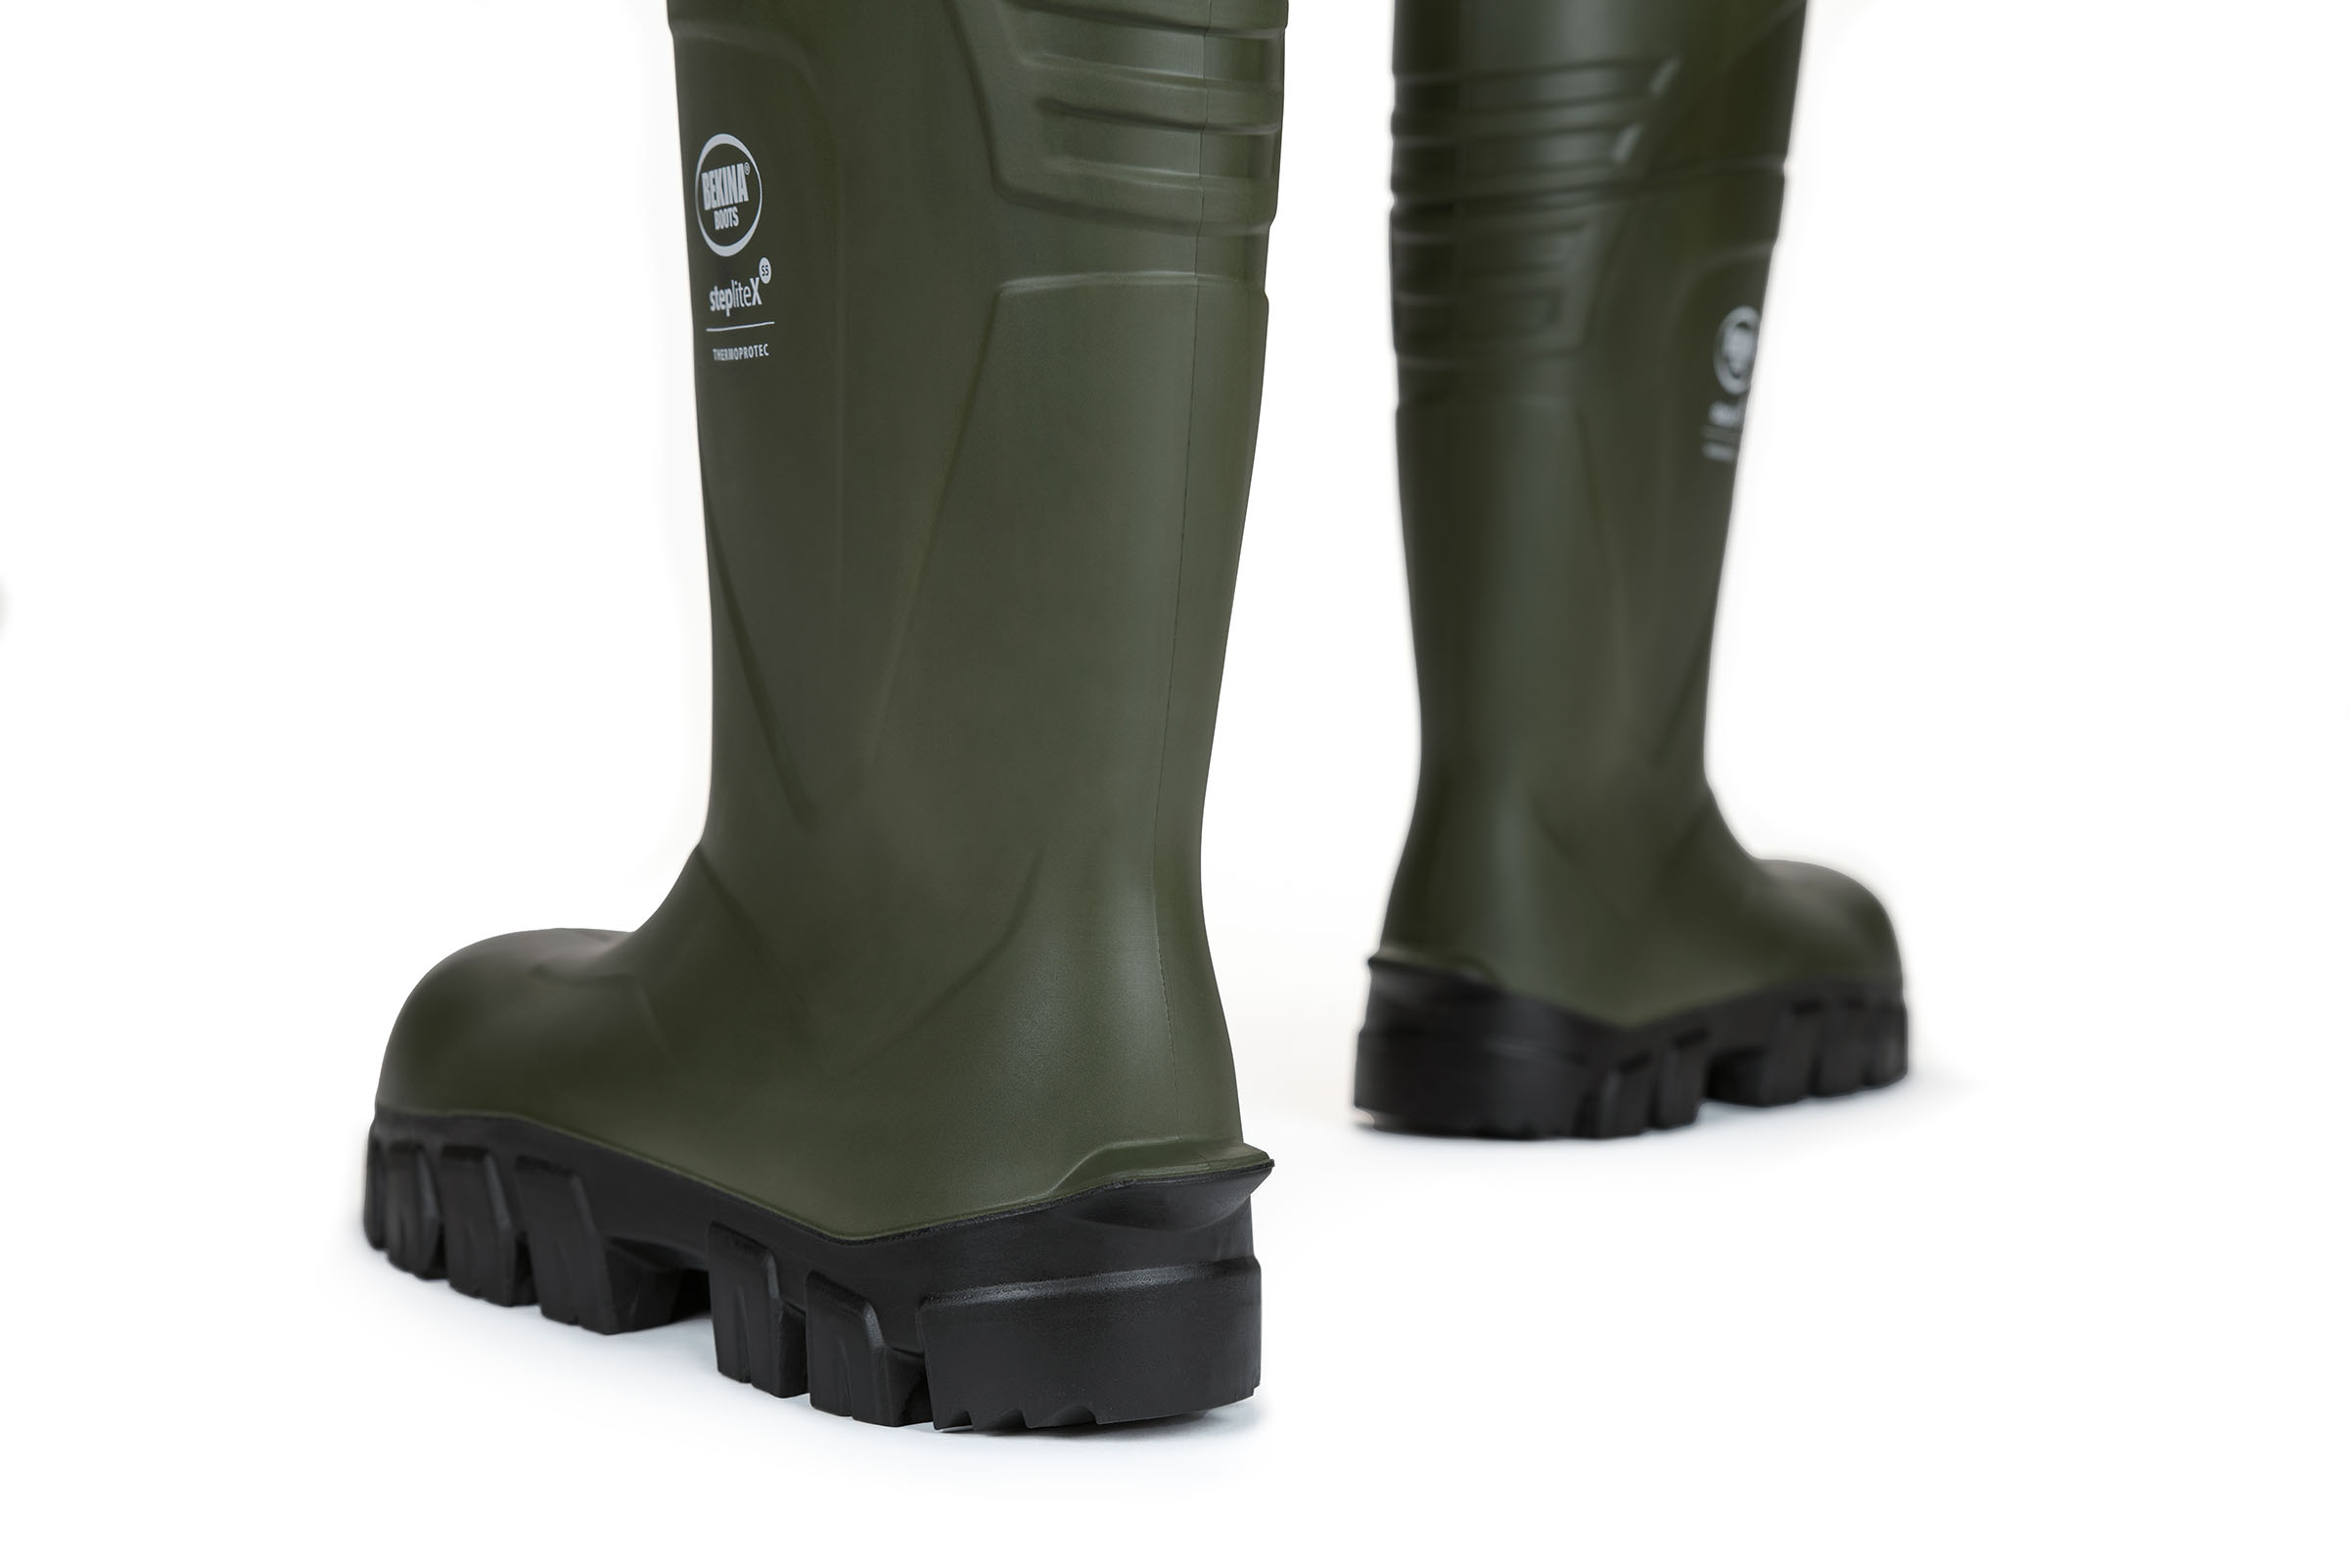 NEW Bekina Steplite®XCi S5 Safety THERMO Wellies Welly Wellington Boots -40°C/F 